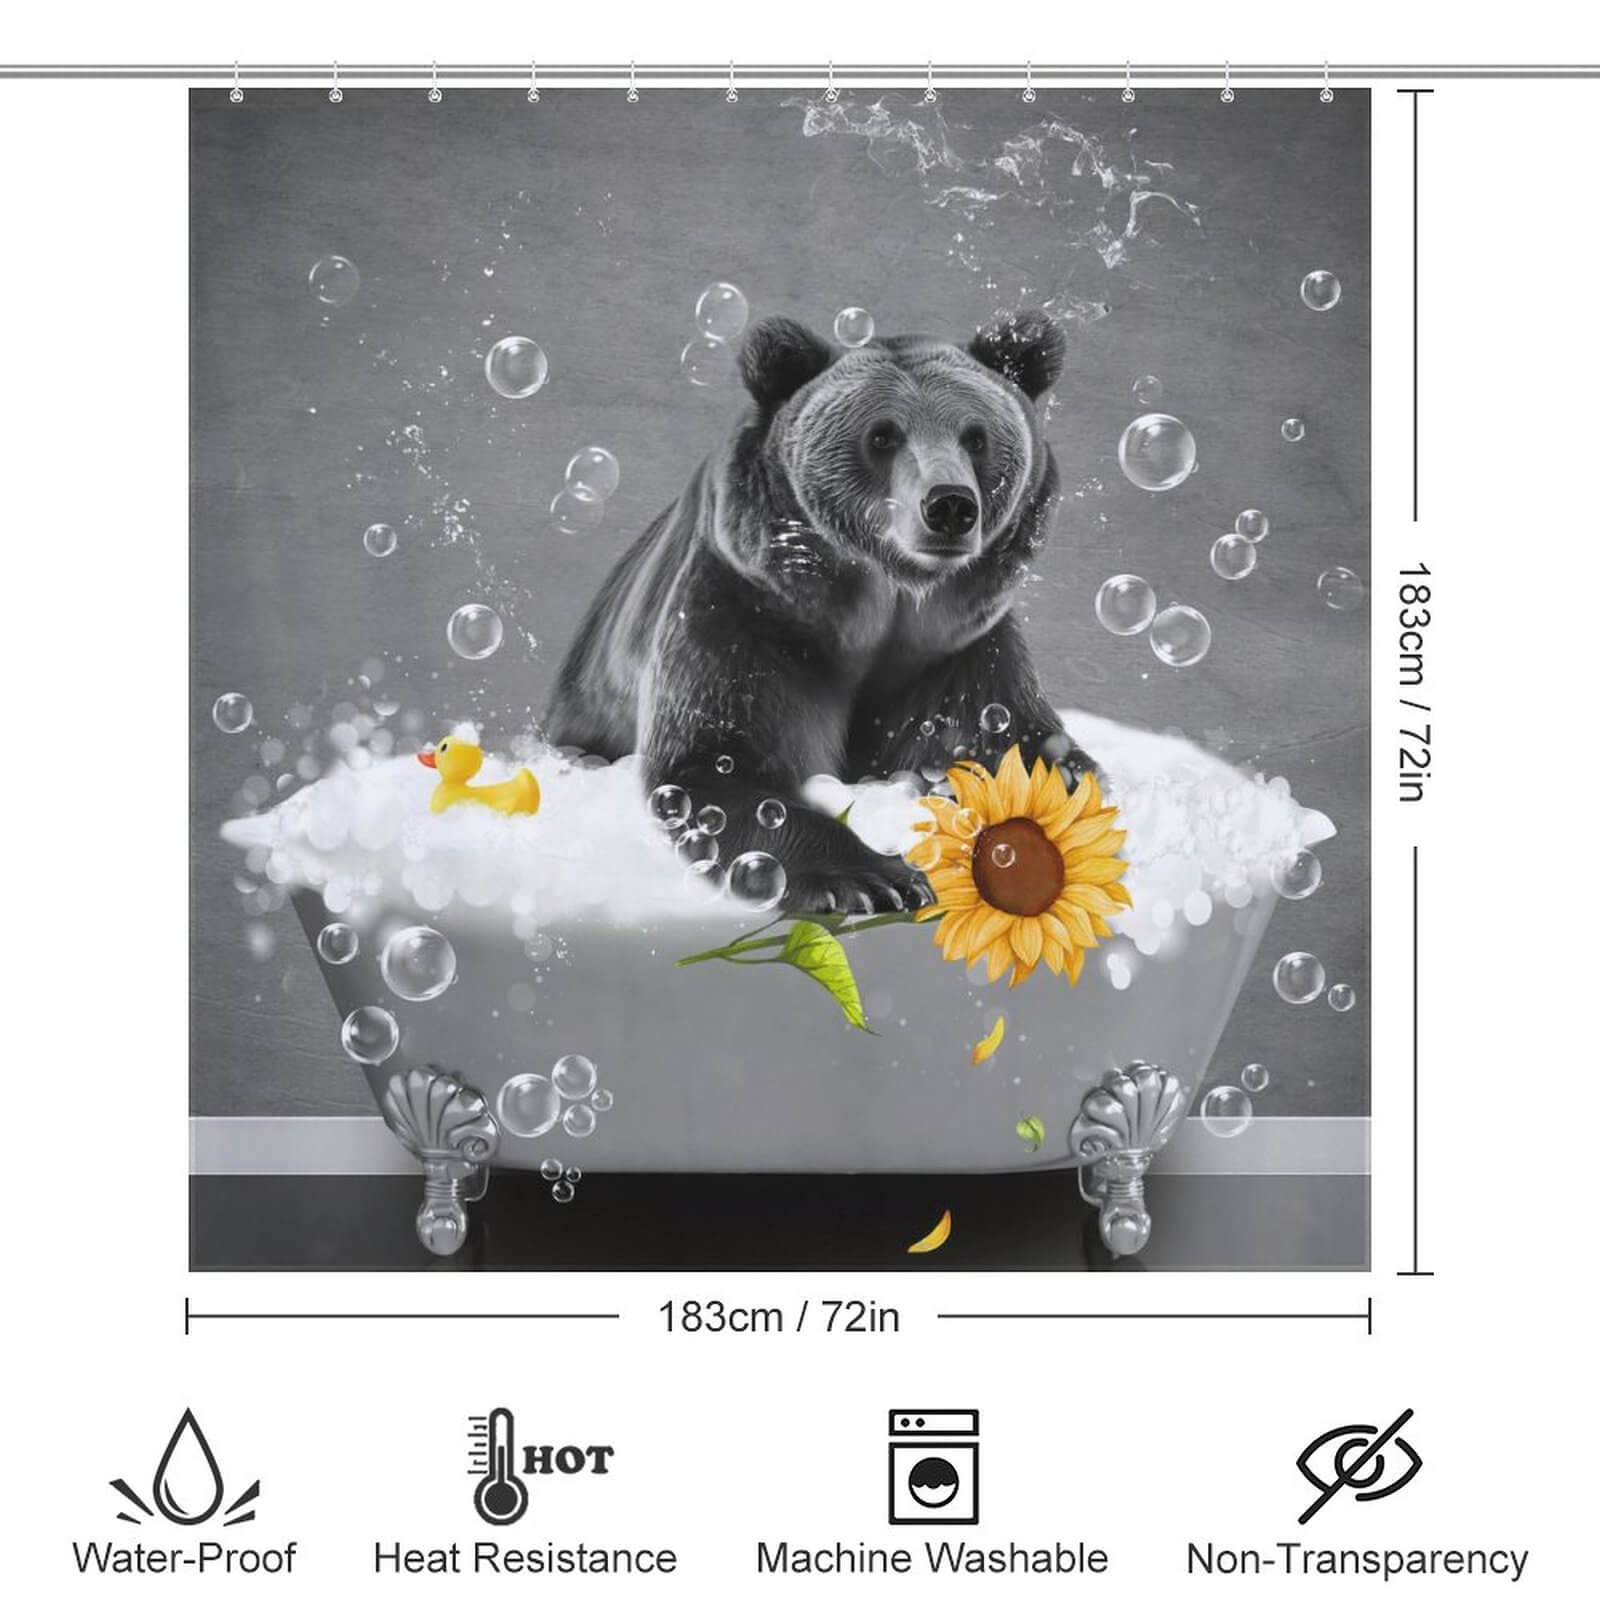 A Funny Sunflower Bear Shower Curtain-Cottoncat, inspired by bears and waterproof, featuring a delightful scene of a bear bathing in a tub surrounded by sunflowers and bubbles, perfect as a bathroom décor.